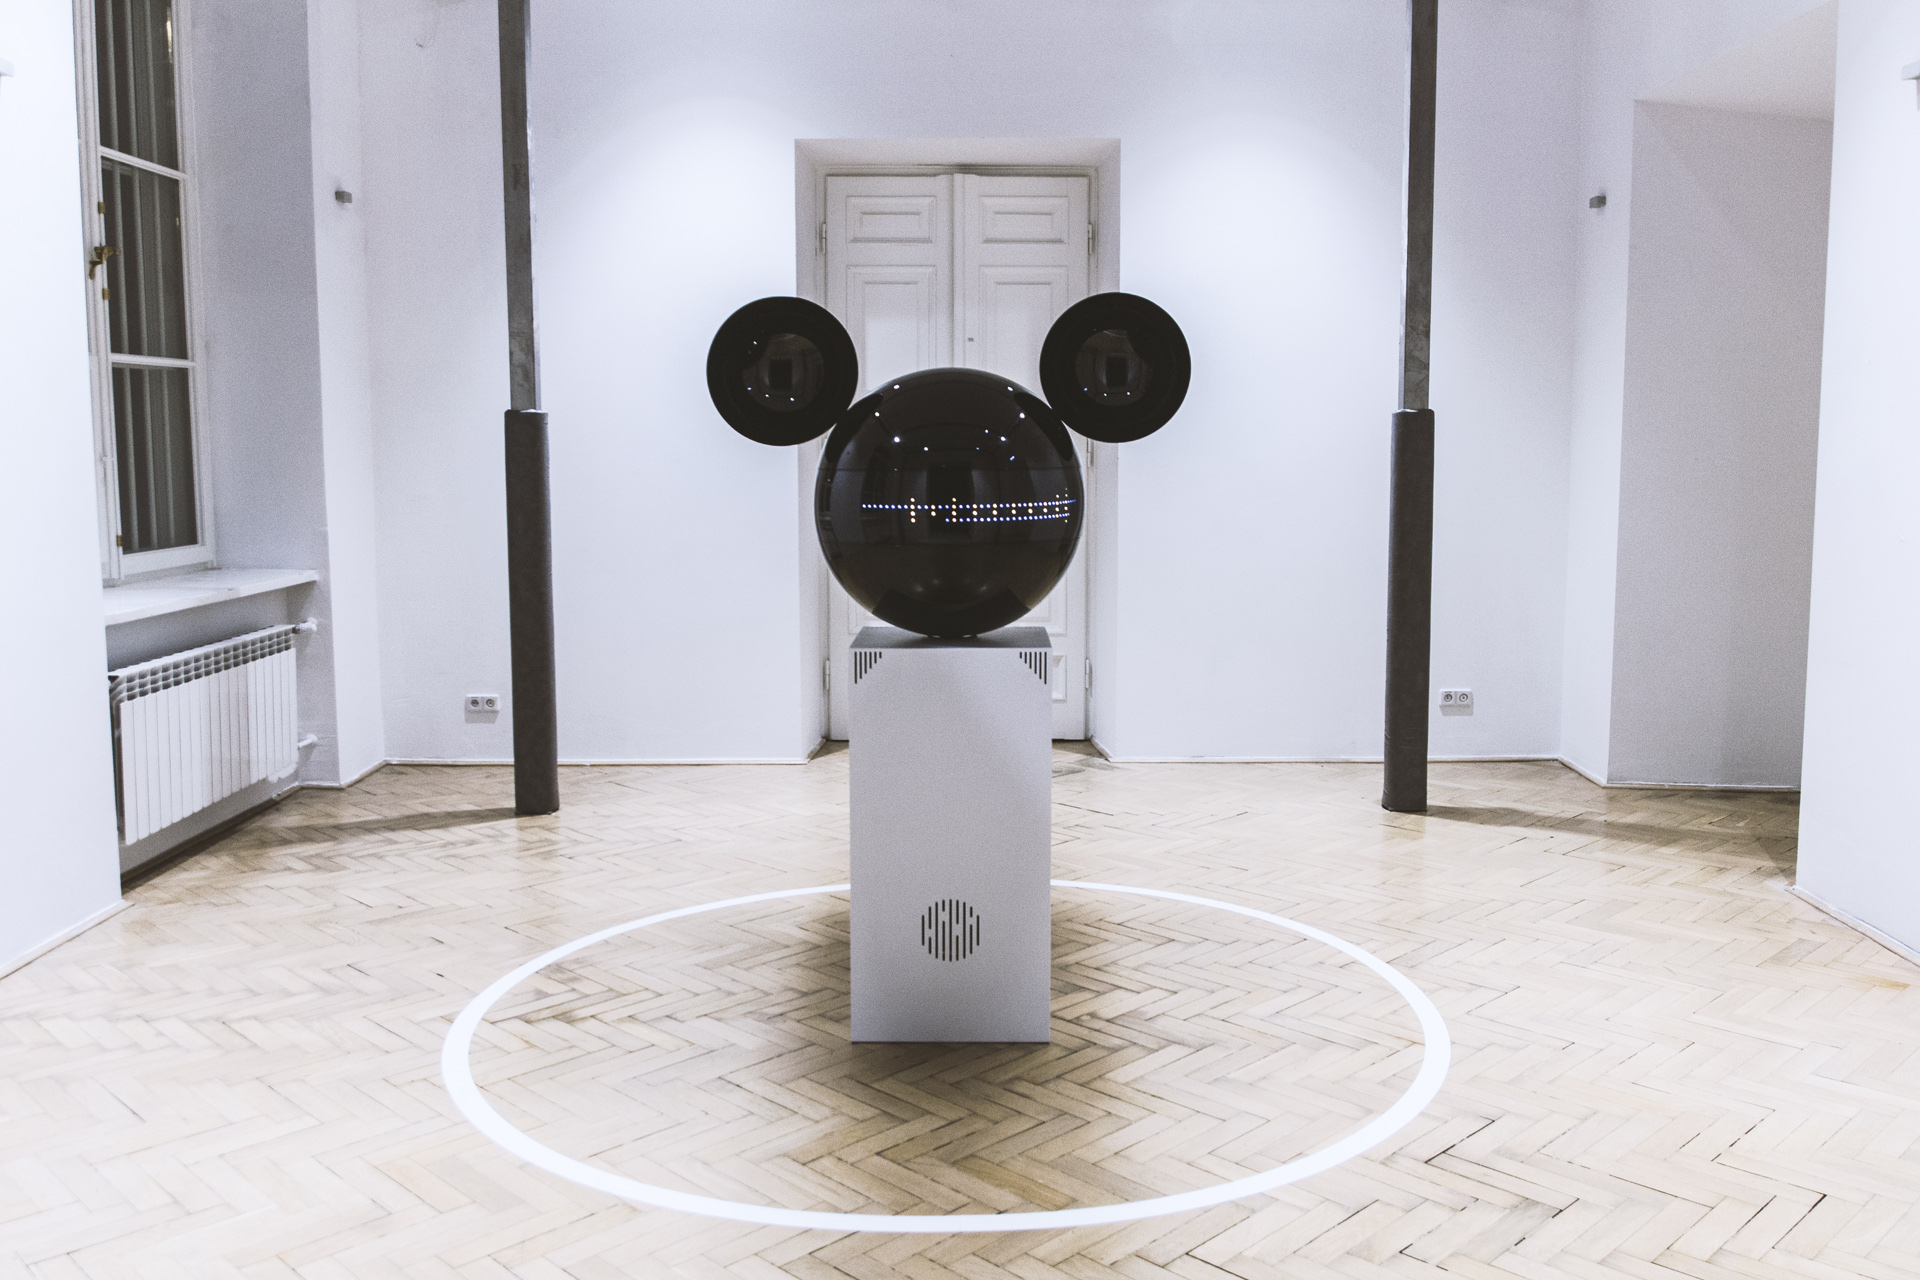 Disney and Warsaw design group bring Mickey Mouse to life in interactive installation